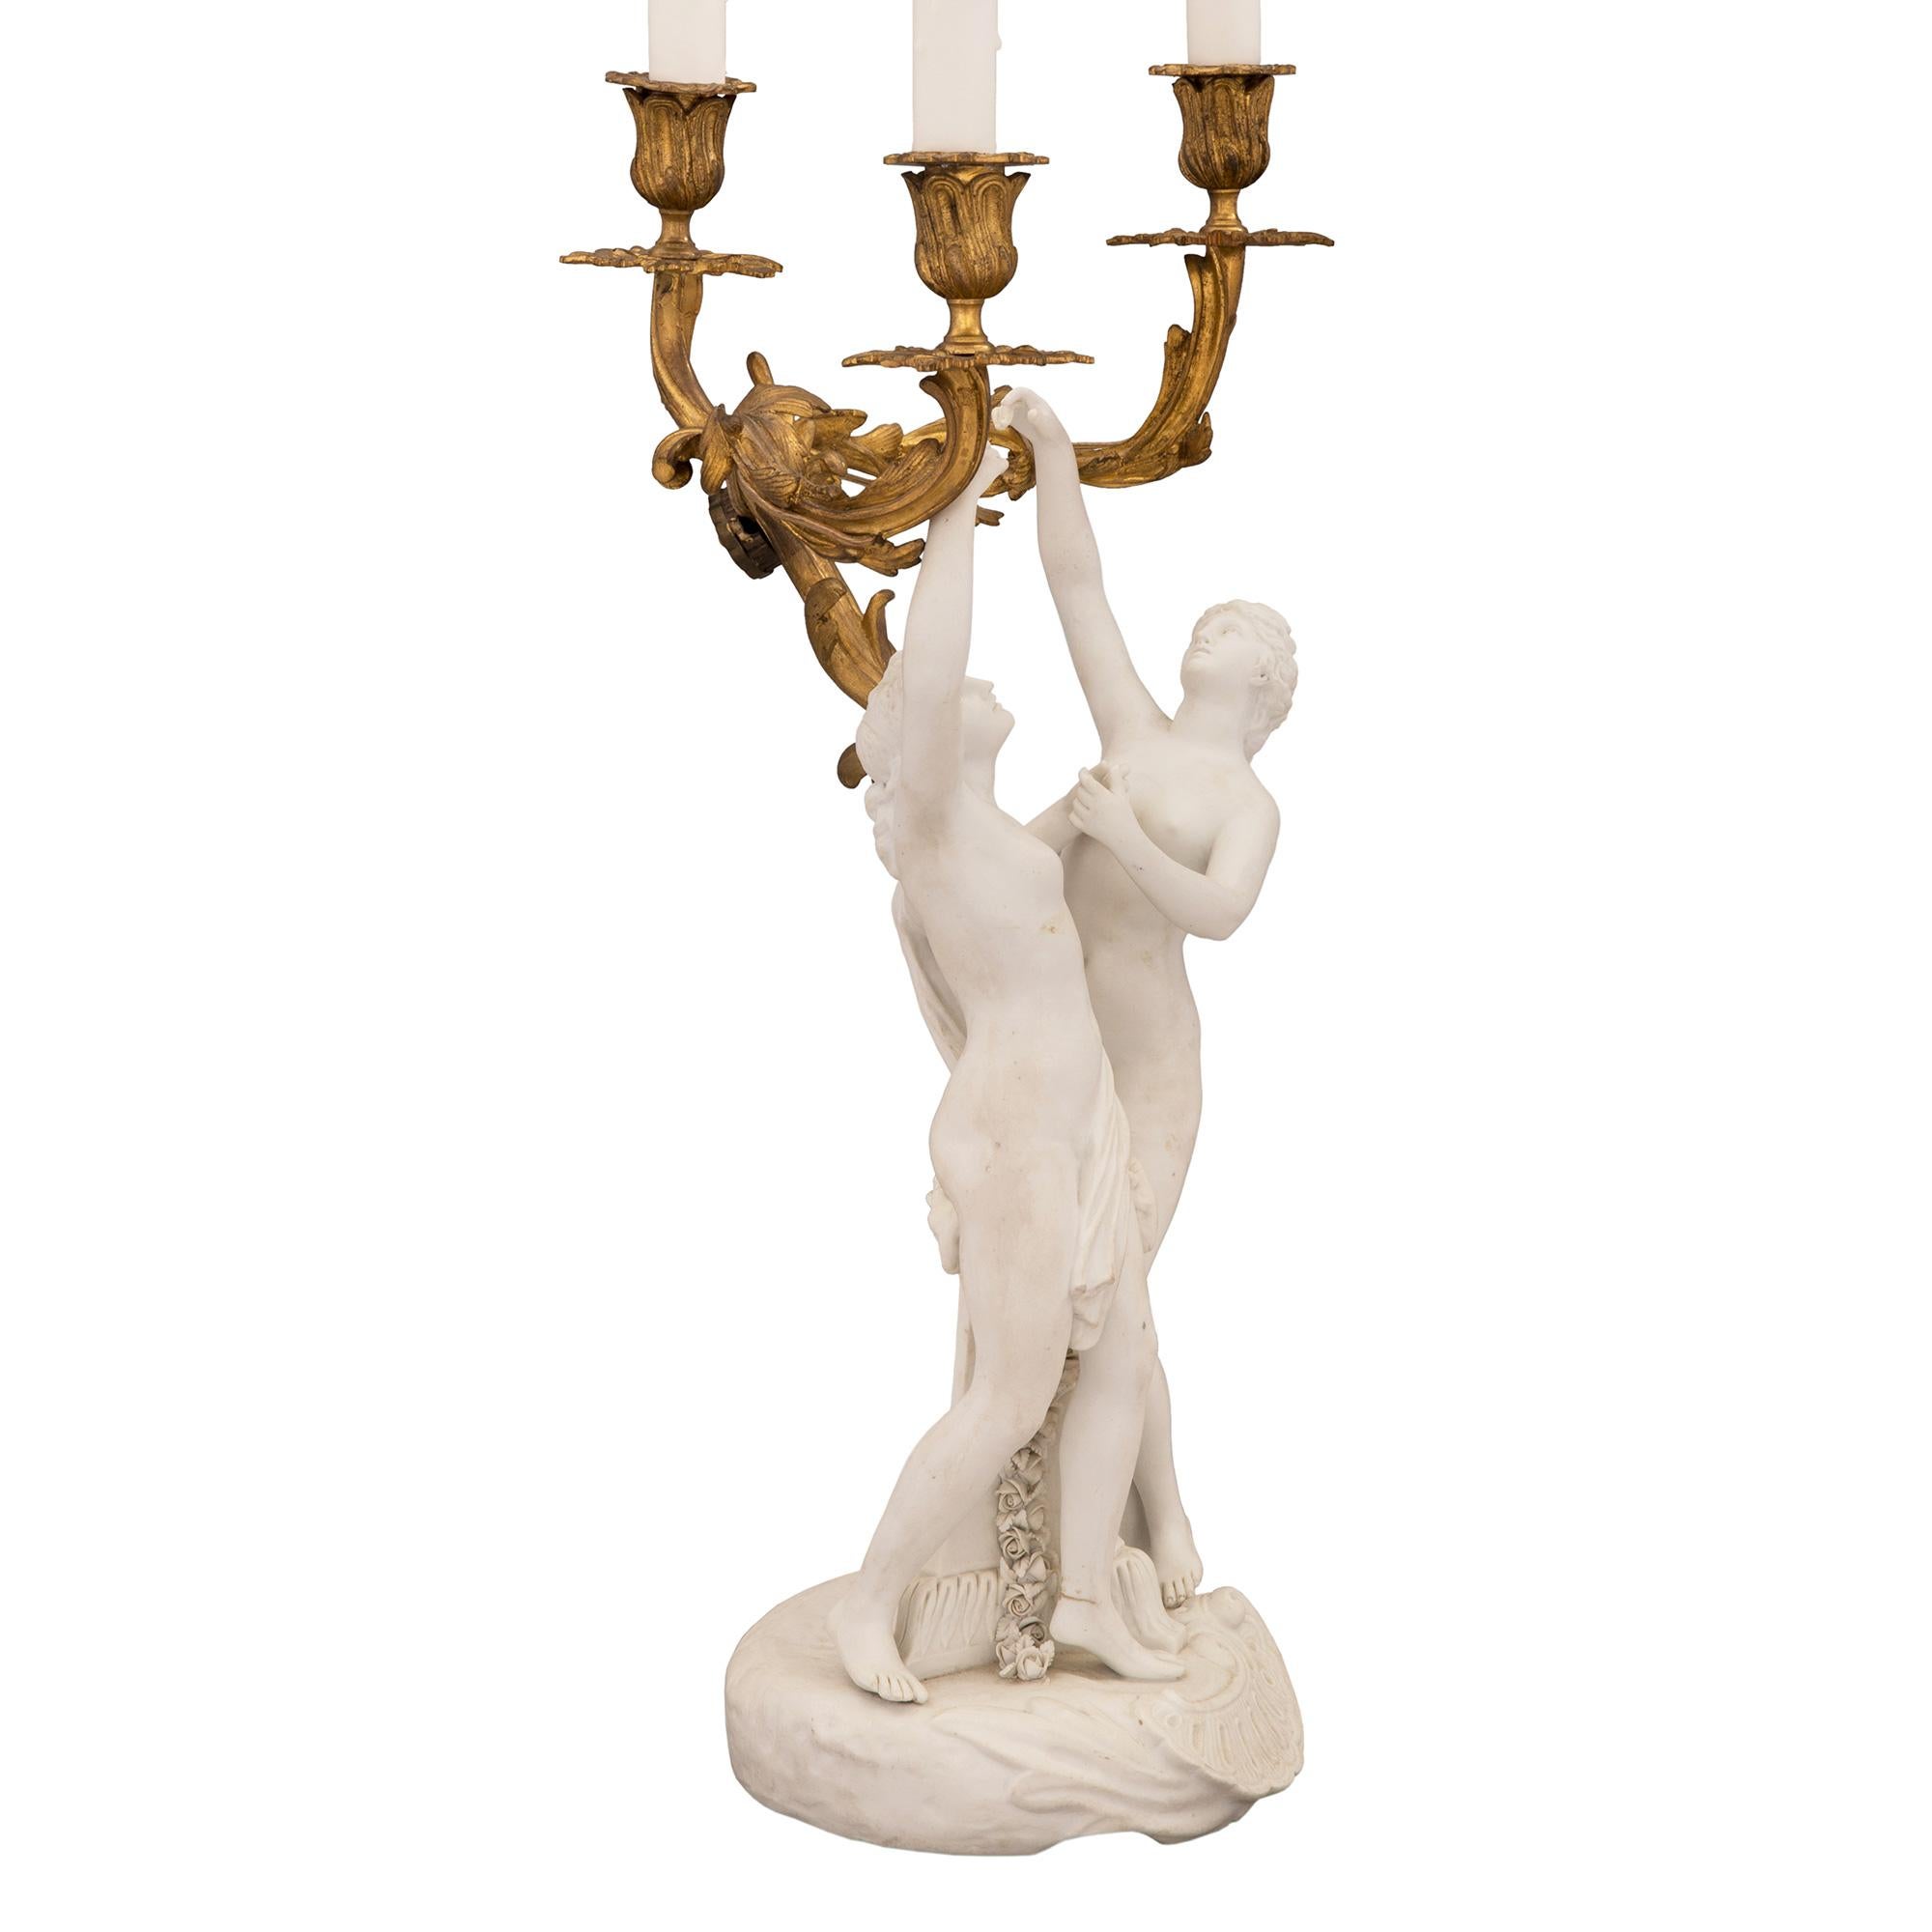 An elegant pair of French 19th century Louis XV st. ormolu and porcelain electrified candelabras lamps, signed Sèvres. Each beautiful lamp is raised by a circular Biscuit de Sèvres porcelain base with large 'C' scrolled reserves and ground like